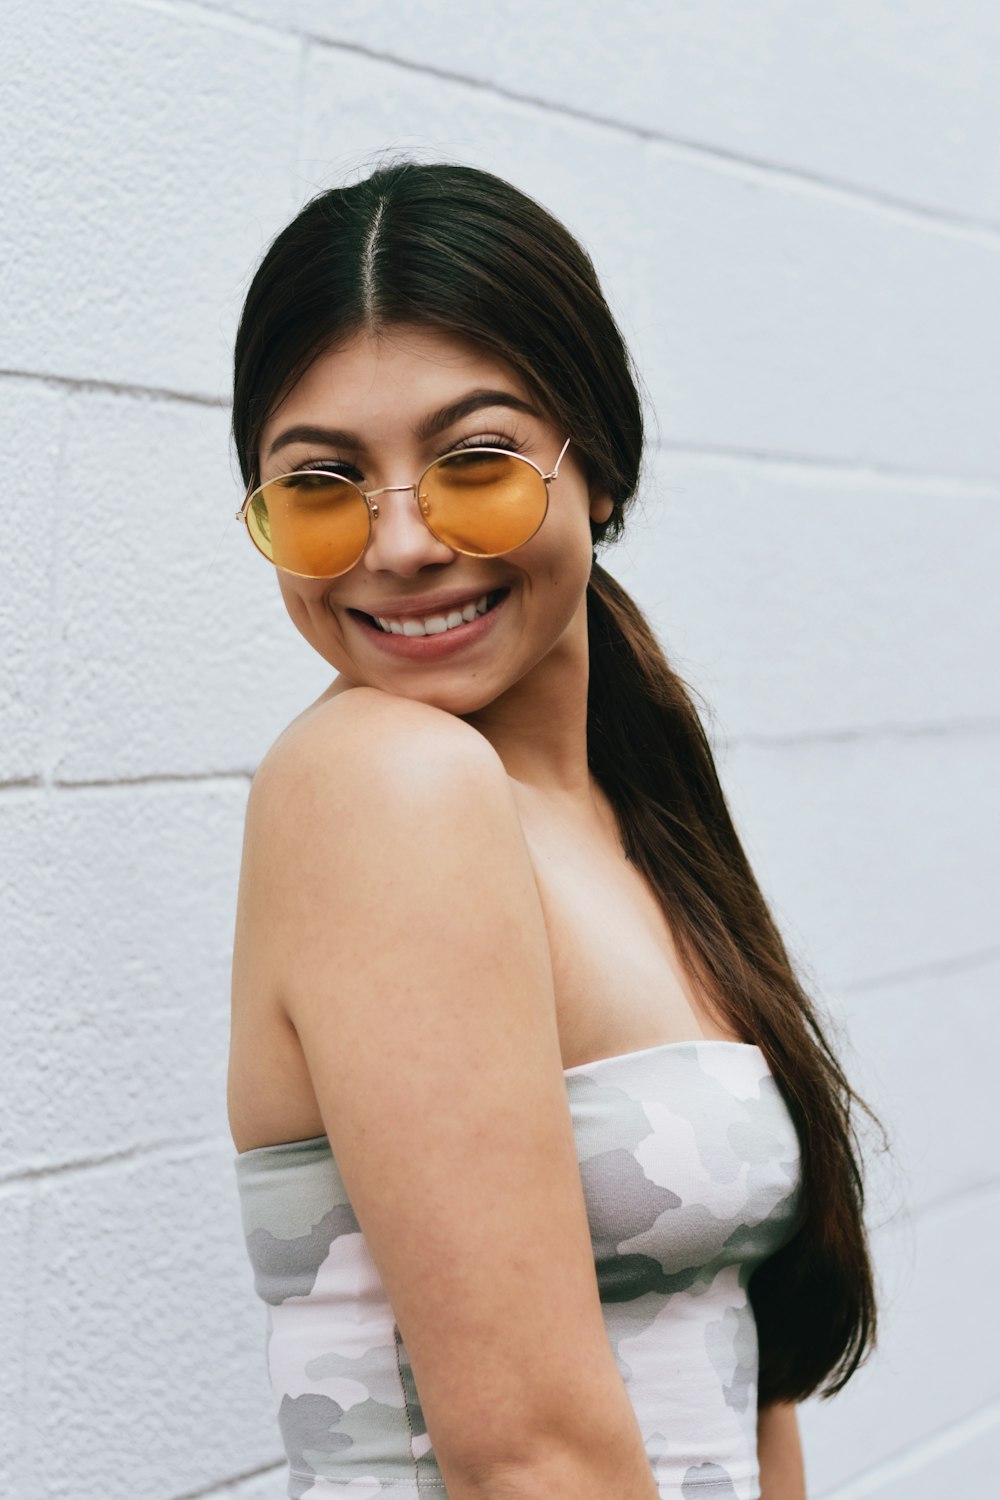 woman in white tube top wearing sunglasses